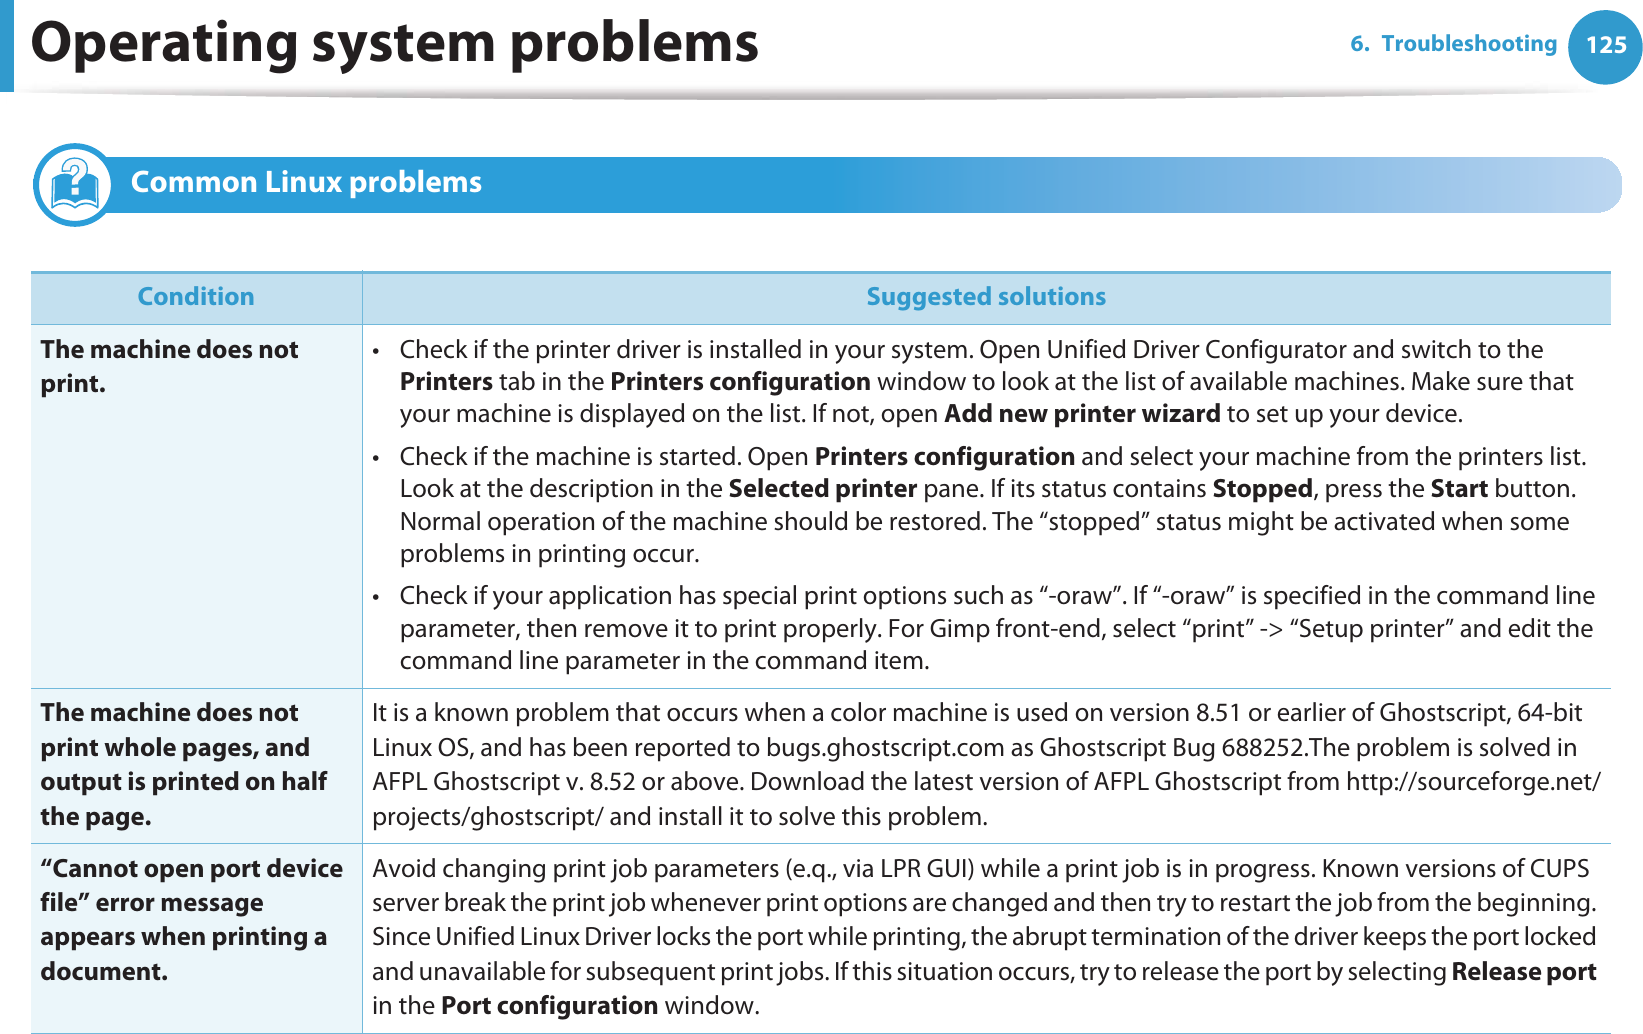 Operating system problems 1256. Troubleshooting3 Common Linux problems  Condition Suggested solutionsThe machine does not print.• Check if the printer driver is installed in your system. Open Unified Driver Configurator and switch to the Printers tab in the Printers configuration window to look at the list of available machines. Make sure that your machine is displayed on the list. If not, open Add new printer wizard to set up your device.• Check if the machine is started. Open Printers configuration and select your machine from the printers list. Look at the description in the Selected printer pane. If its status contains Stopped, press the Start button. Normal operation of the machine should be restored. The “stopped” status might be activated when some problems in printing occur. • Check if your application has special print options such as “-oraw”. If “-oraw” is specified in the command line parameter, then remove it to print properly. For Gimp front-end, select “print” -&gt; “Setup printer” and edit the command line parameter in the command item.The machine does not print whole pages, and output is printed on half the page.It is a known problem that occurs when a color machine is used on version 8.51 or earlier of Ghostscript, 64-bit Linux OS, and has been reported to bugs.ghostscript.com as Ghostscript Bug 688252.The problem is solved in AFPL Ghostscript v. 8.52 or above. Download the latest version of AFPL Ghostscript from http://sourceforge.net/projects/ghostscript/ and install it to solve this problem.“Cannot open port device file” error message appears when printing a document.Avoid changing print job parameters (e.q., via LPR GUI) while a print job is in progress. Known versions of CUPS server break the print job whenever print options are changed and then try to restart the job from the beginning. Since Unified Linux Driver locks the port while printing, the abrupt termination of the driver keeps the port locked and unavailable for subsequent print jobs. If this situation occurs, try to release the port by selecting Release port in the Port configuration window.